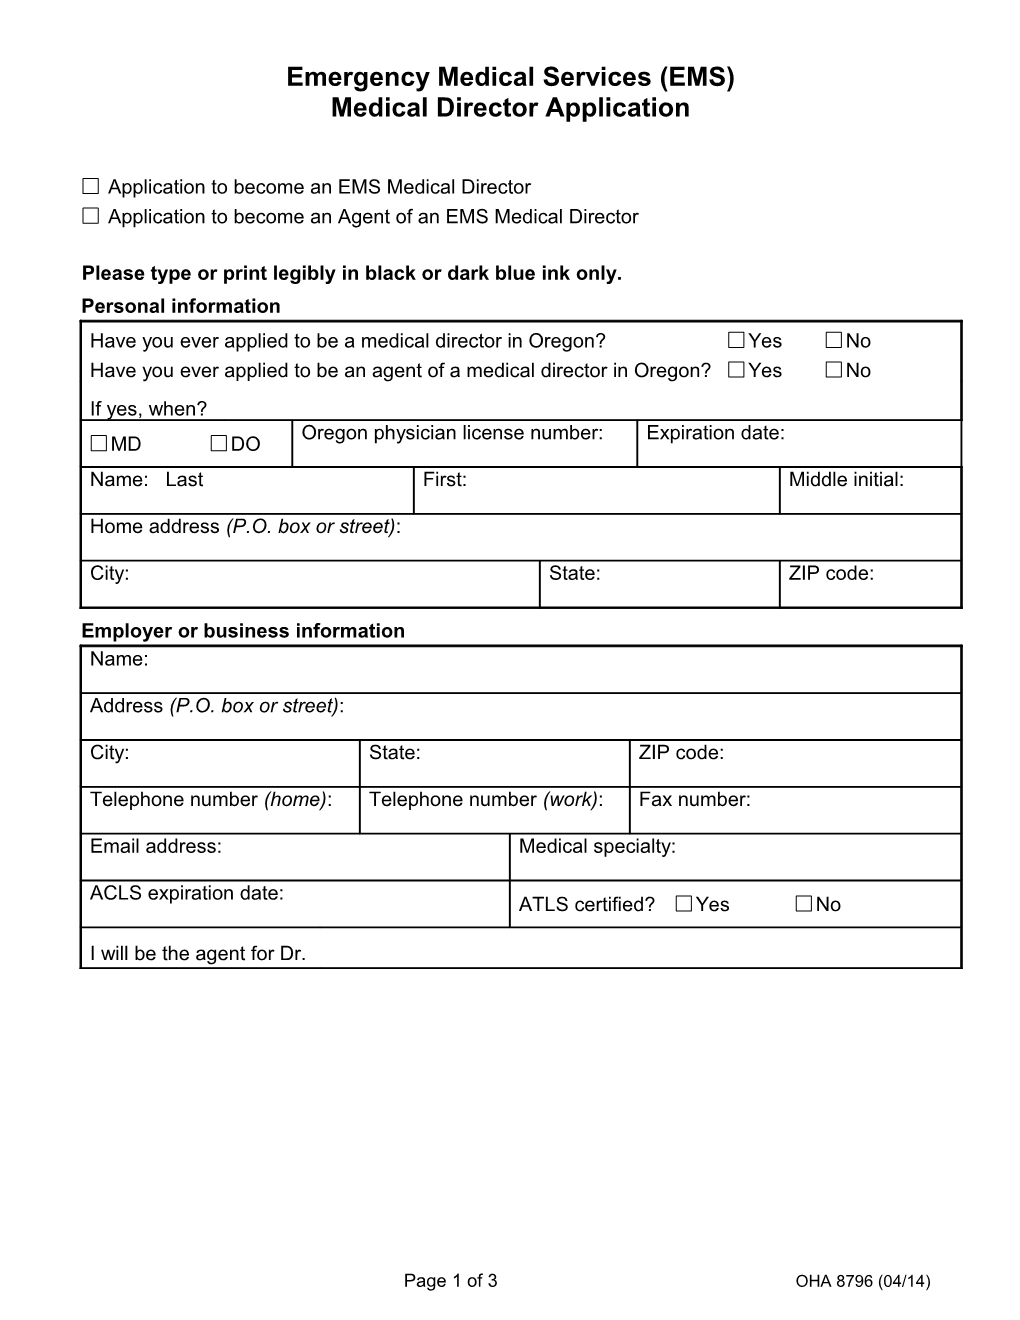 Emergency Medical Services Director Application OHA 8796